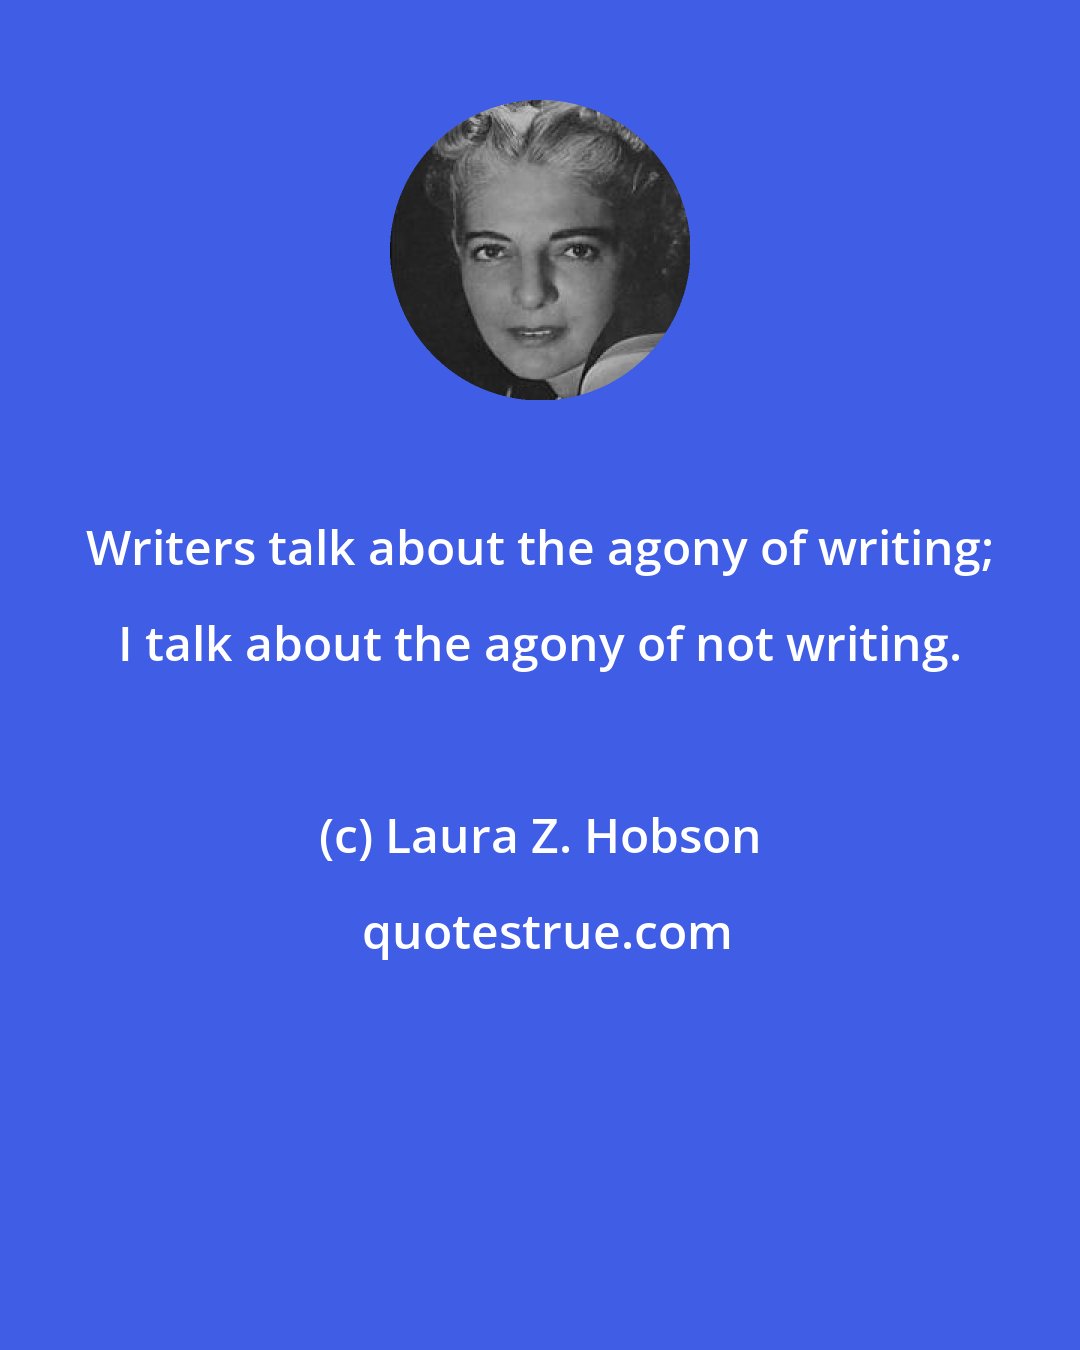 Laura Z. Hobson: Writers talk about the agony of writing; I talk about the agony of not writing.